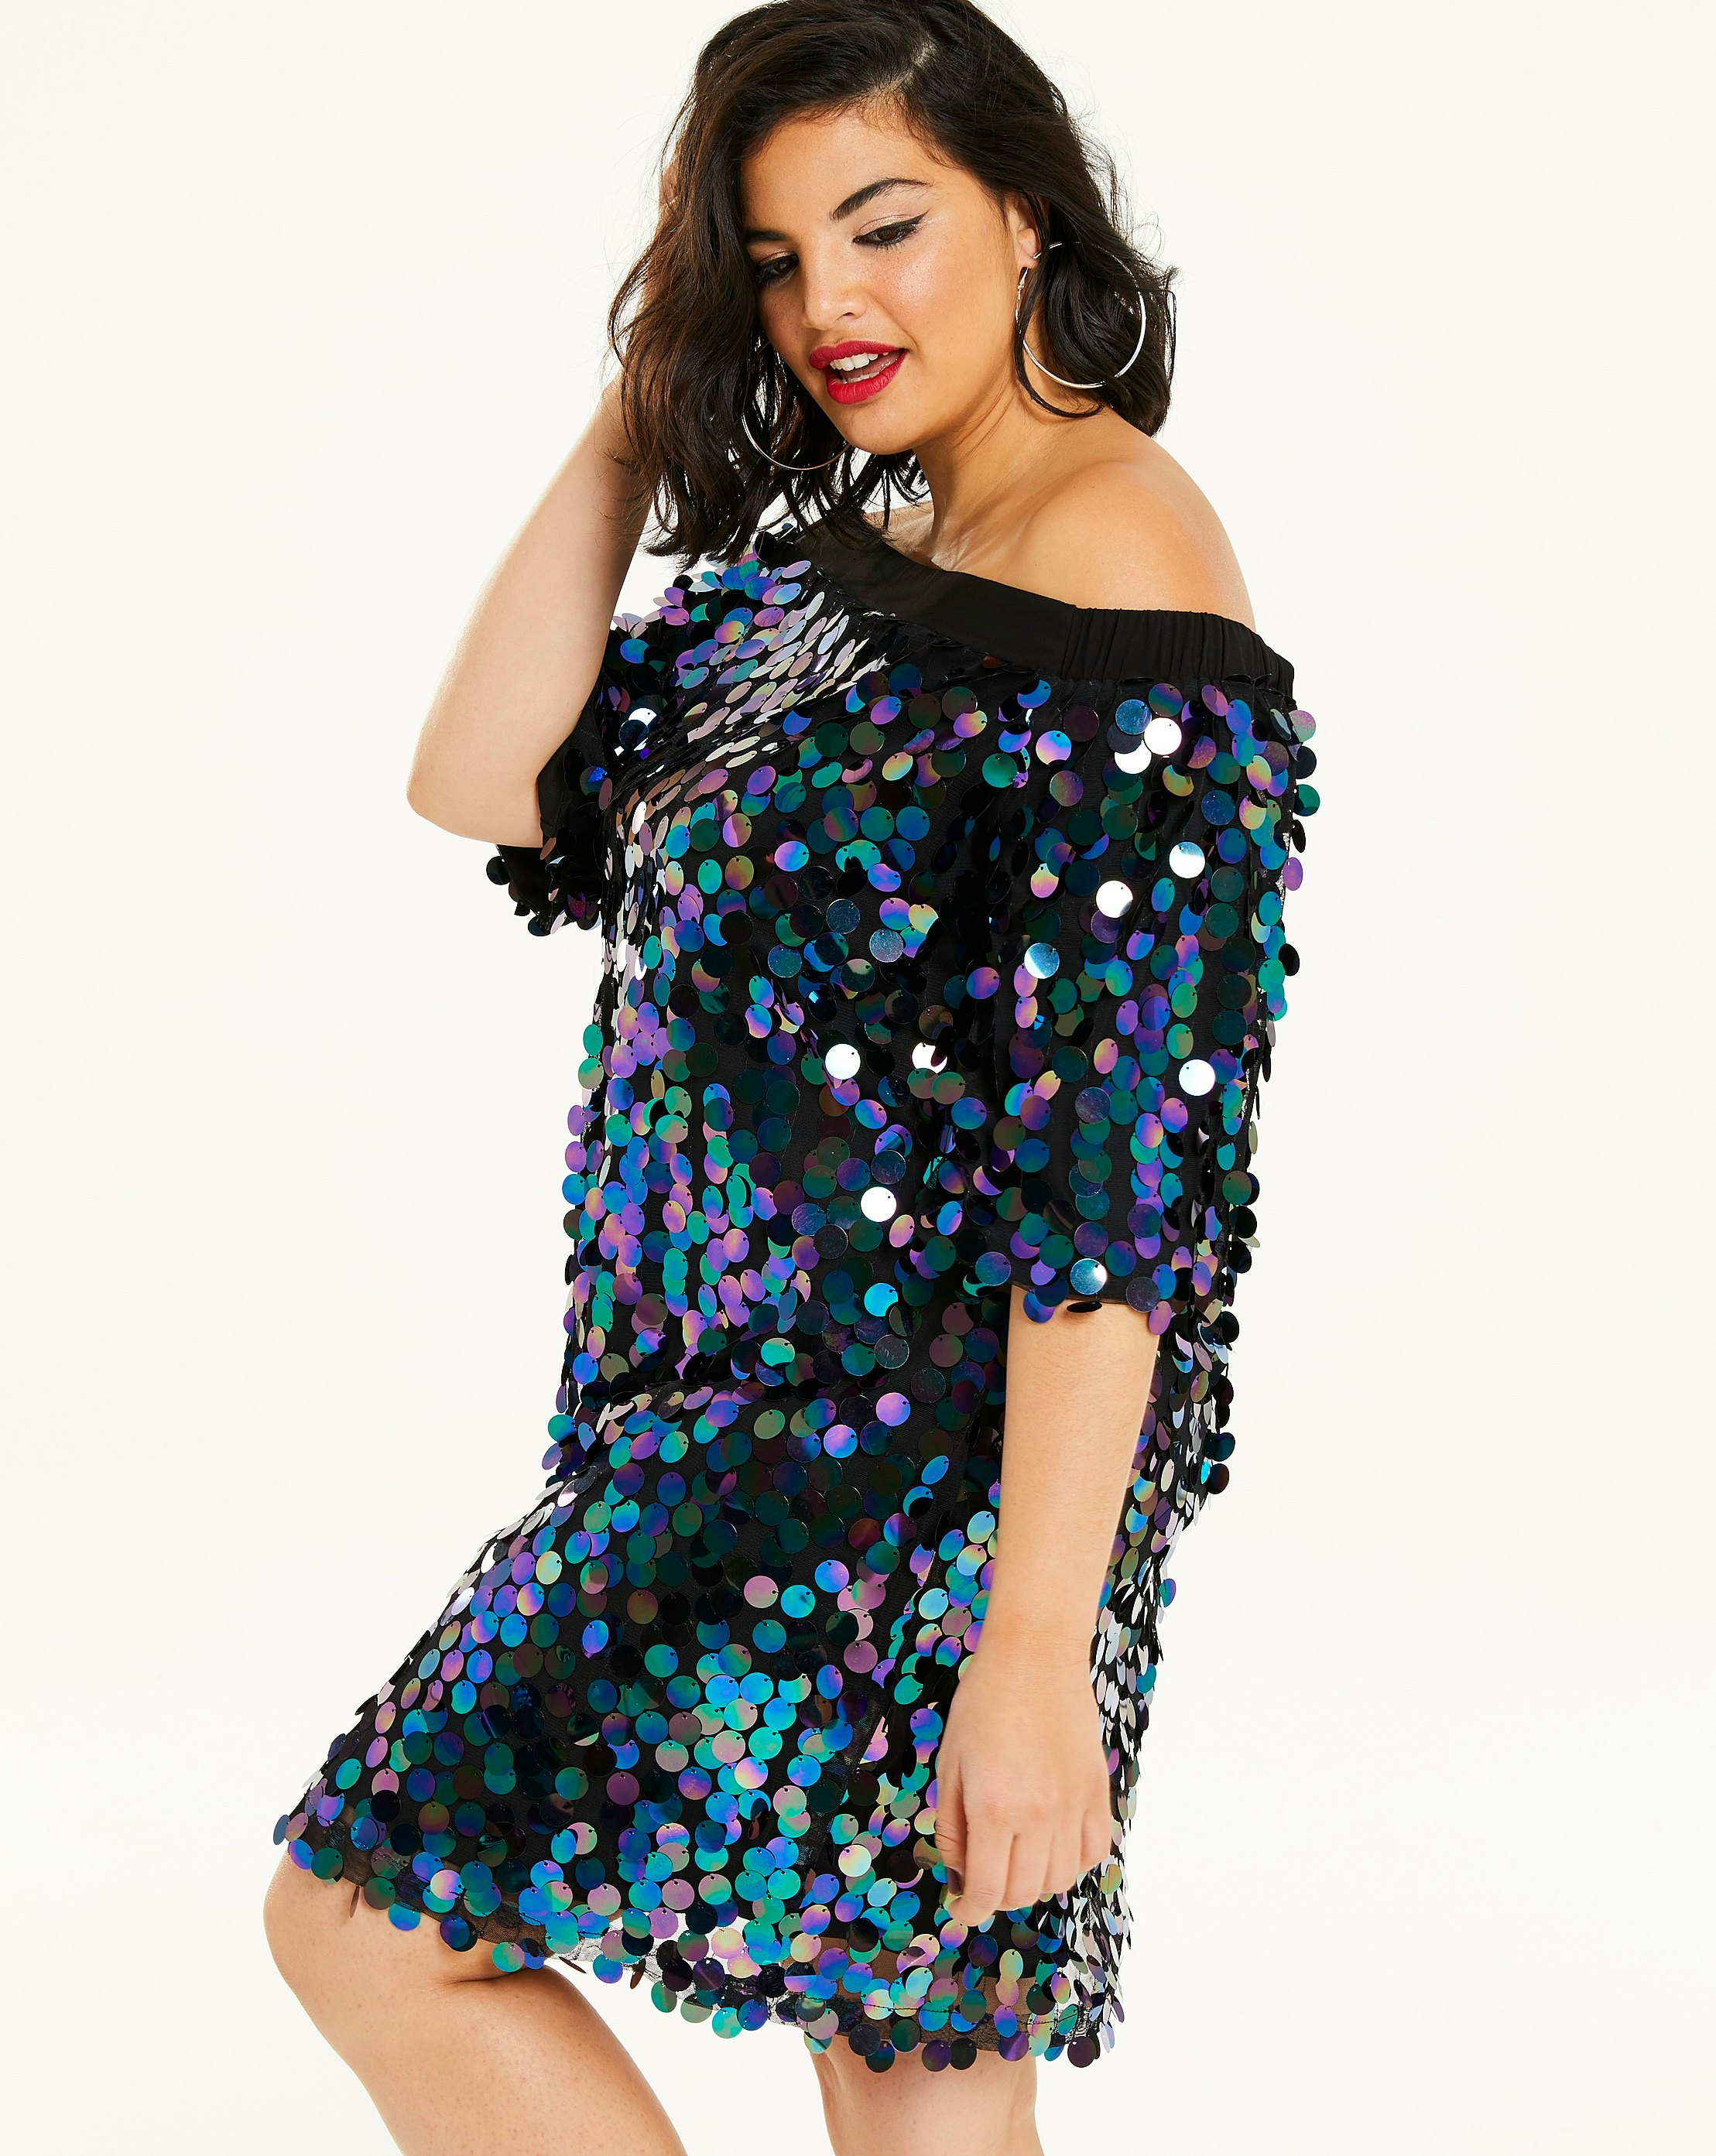 new year's eve dresses for curvy